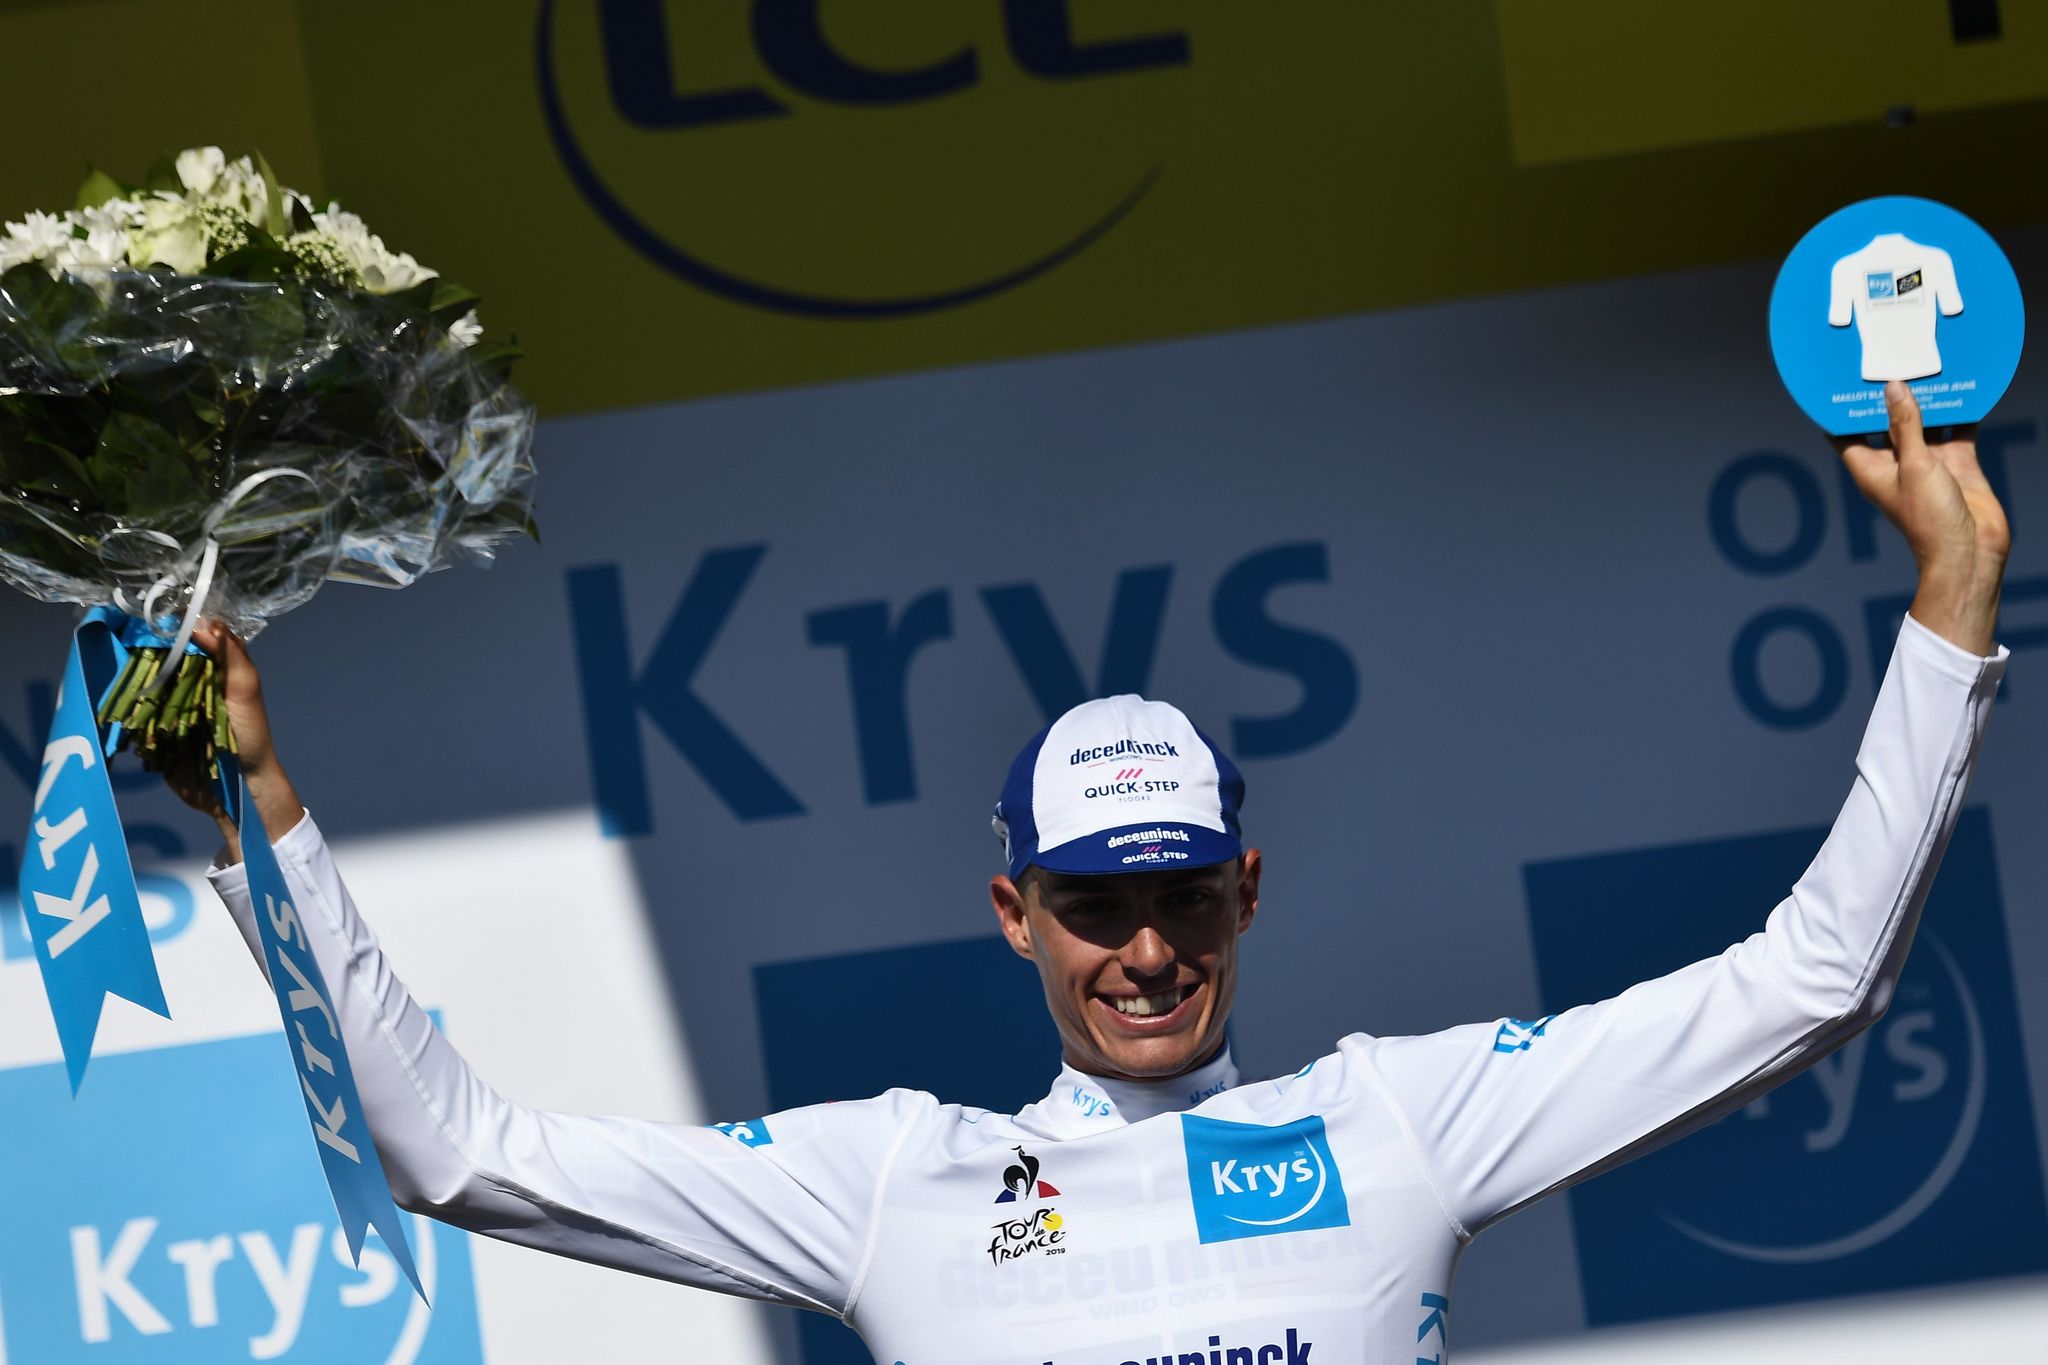 Spains <HIT>Enric</HIT><HIT>Mas</HIT> celebrates his best youngs white jersey on the podium of the thirteenth stage of the 106th edition of the Tour de France cycling race, a 27,2-kilometer individual time-trial in Pau, on July 19, 2019. (Photo by Anne-Christine POUJOULAT / AFP)